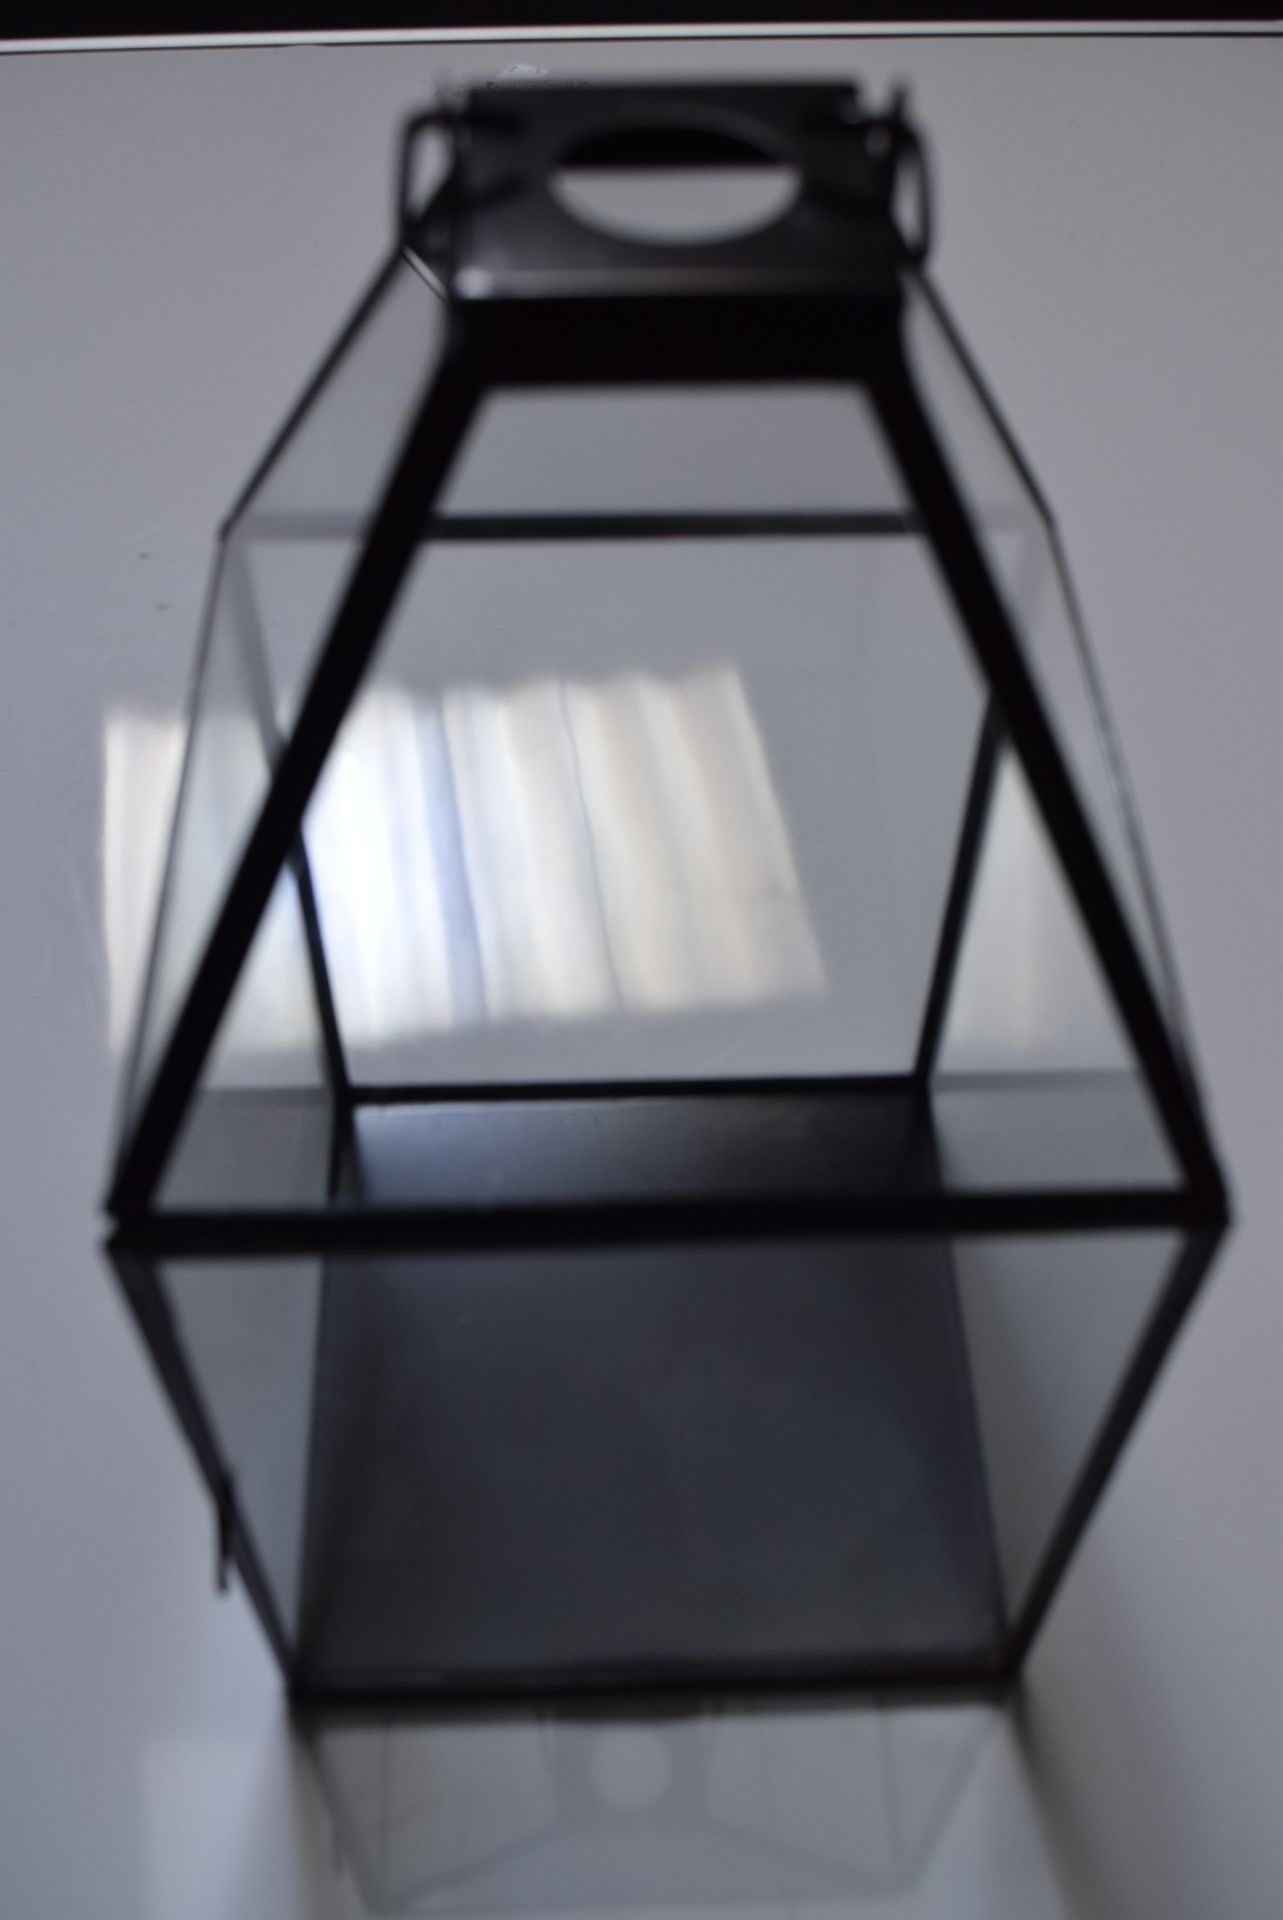 1 X BOXED UNUSED WR METAL AND GLASS LANTERN IN BLACK 18X18X34CM